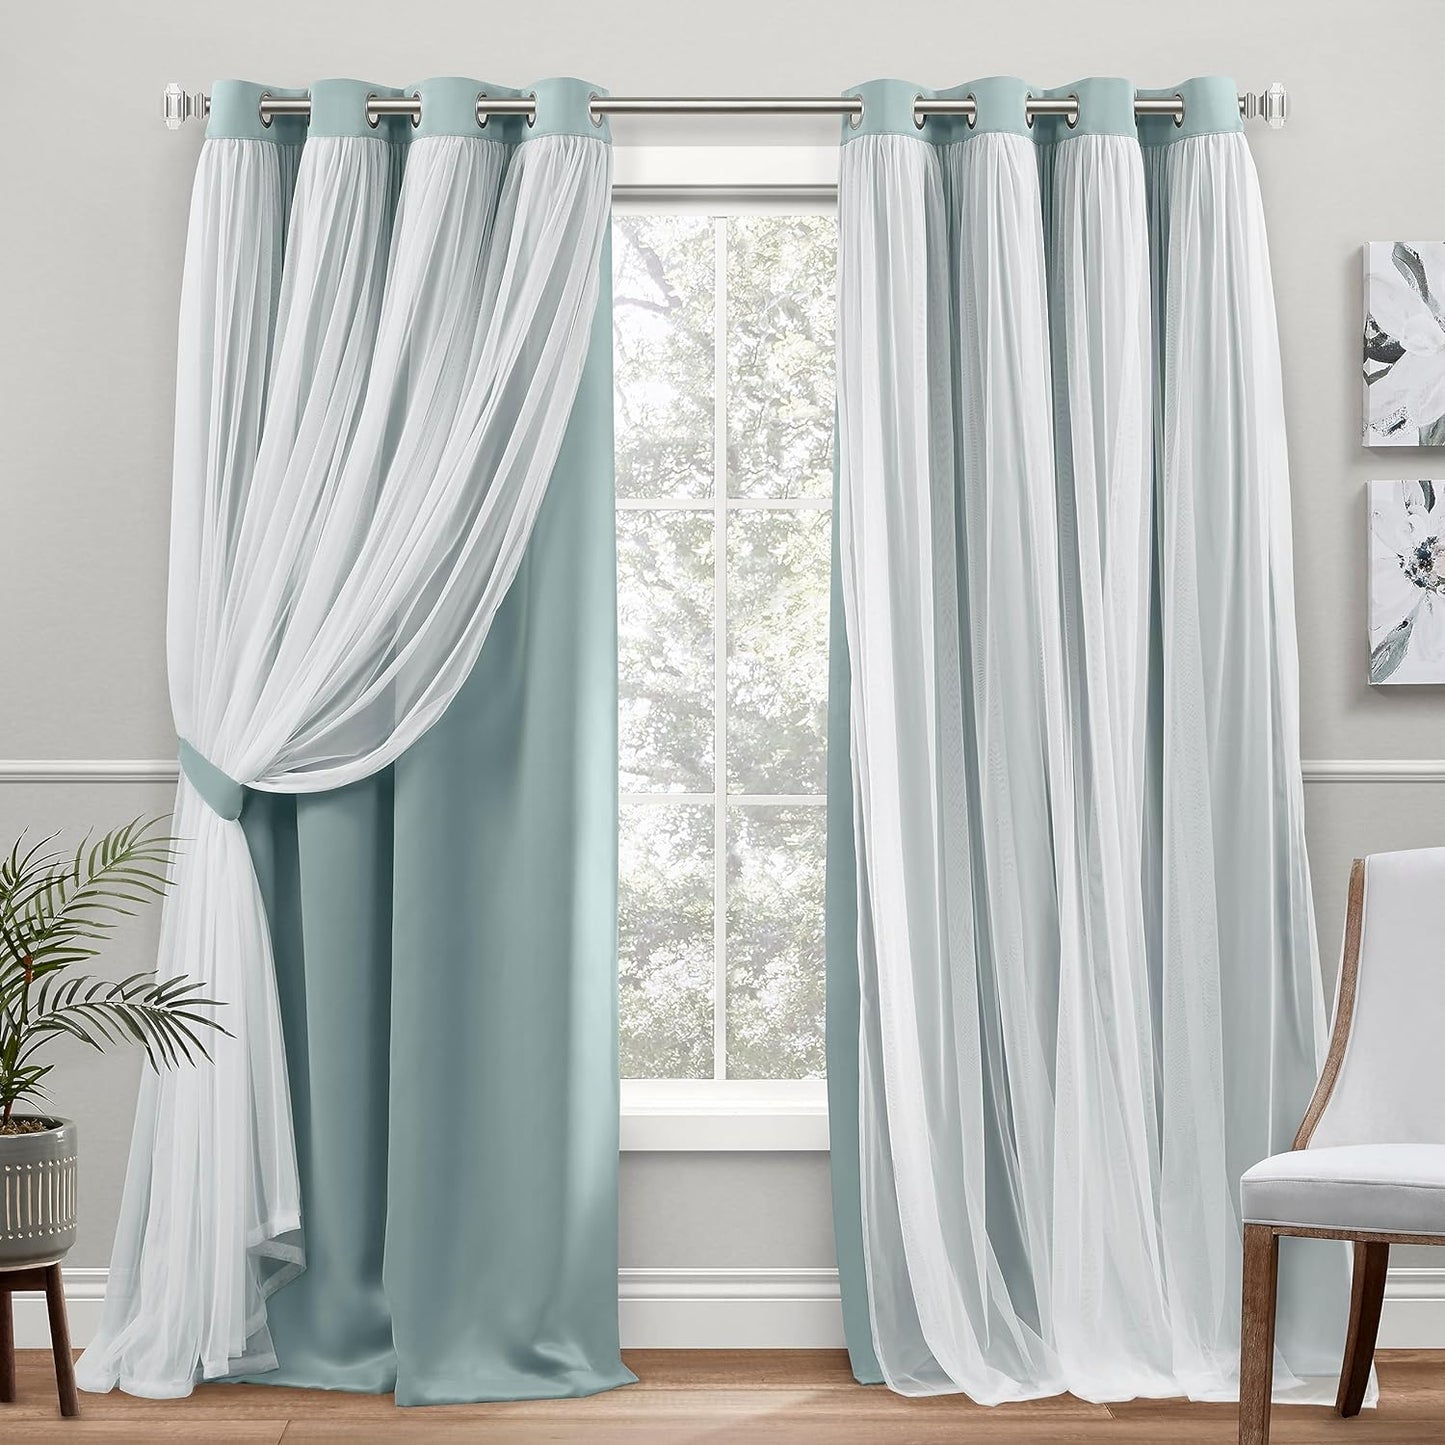 Exclusive Home Catarina Layered Solid Room Darkening Blackout and Sheer Grommet Top Curtain Panel Pair, 52"X84", Rose Blush  Exclusive Home Curtains Seafoam 52X108 